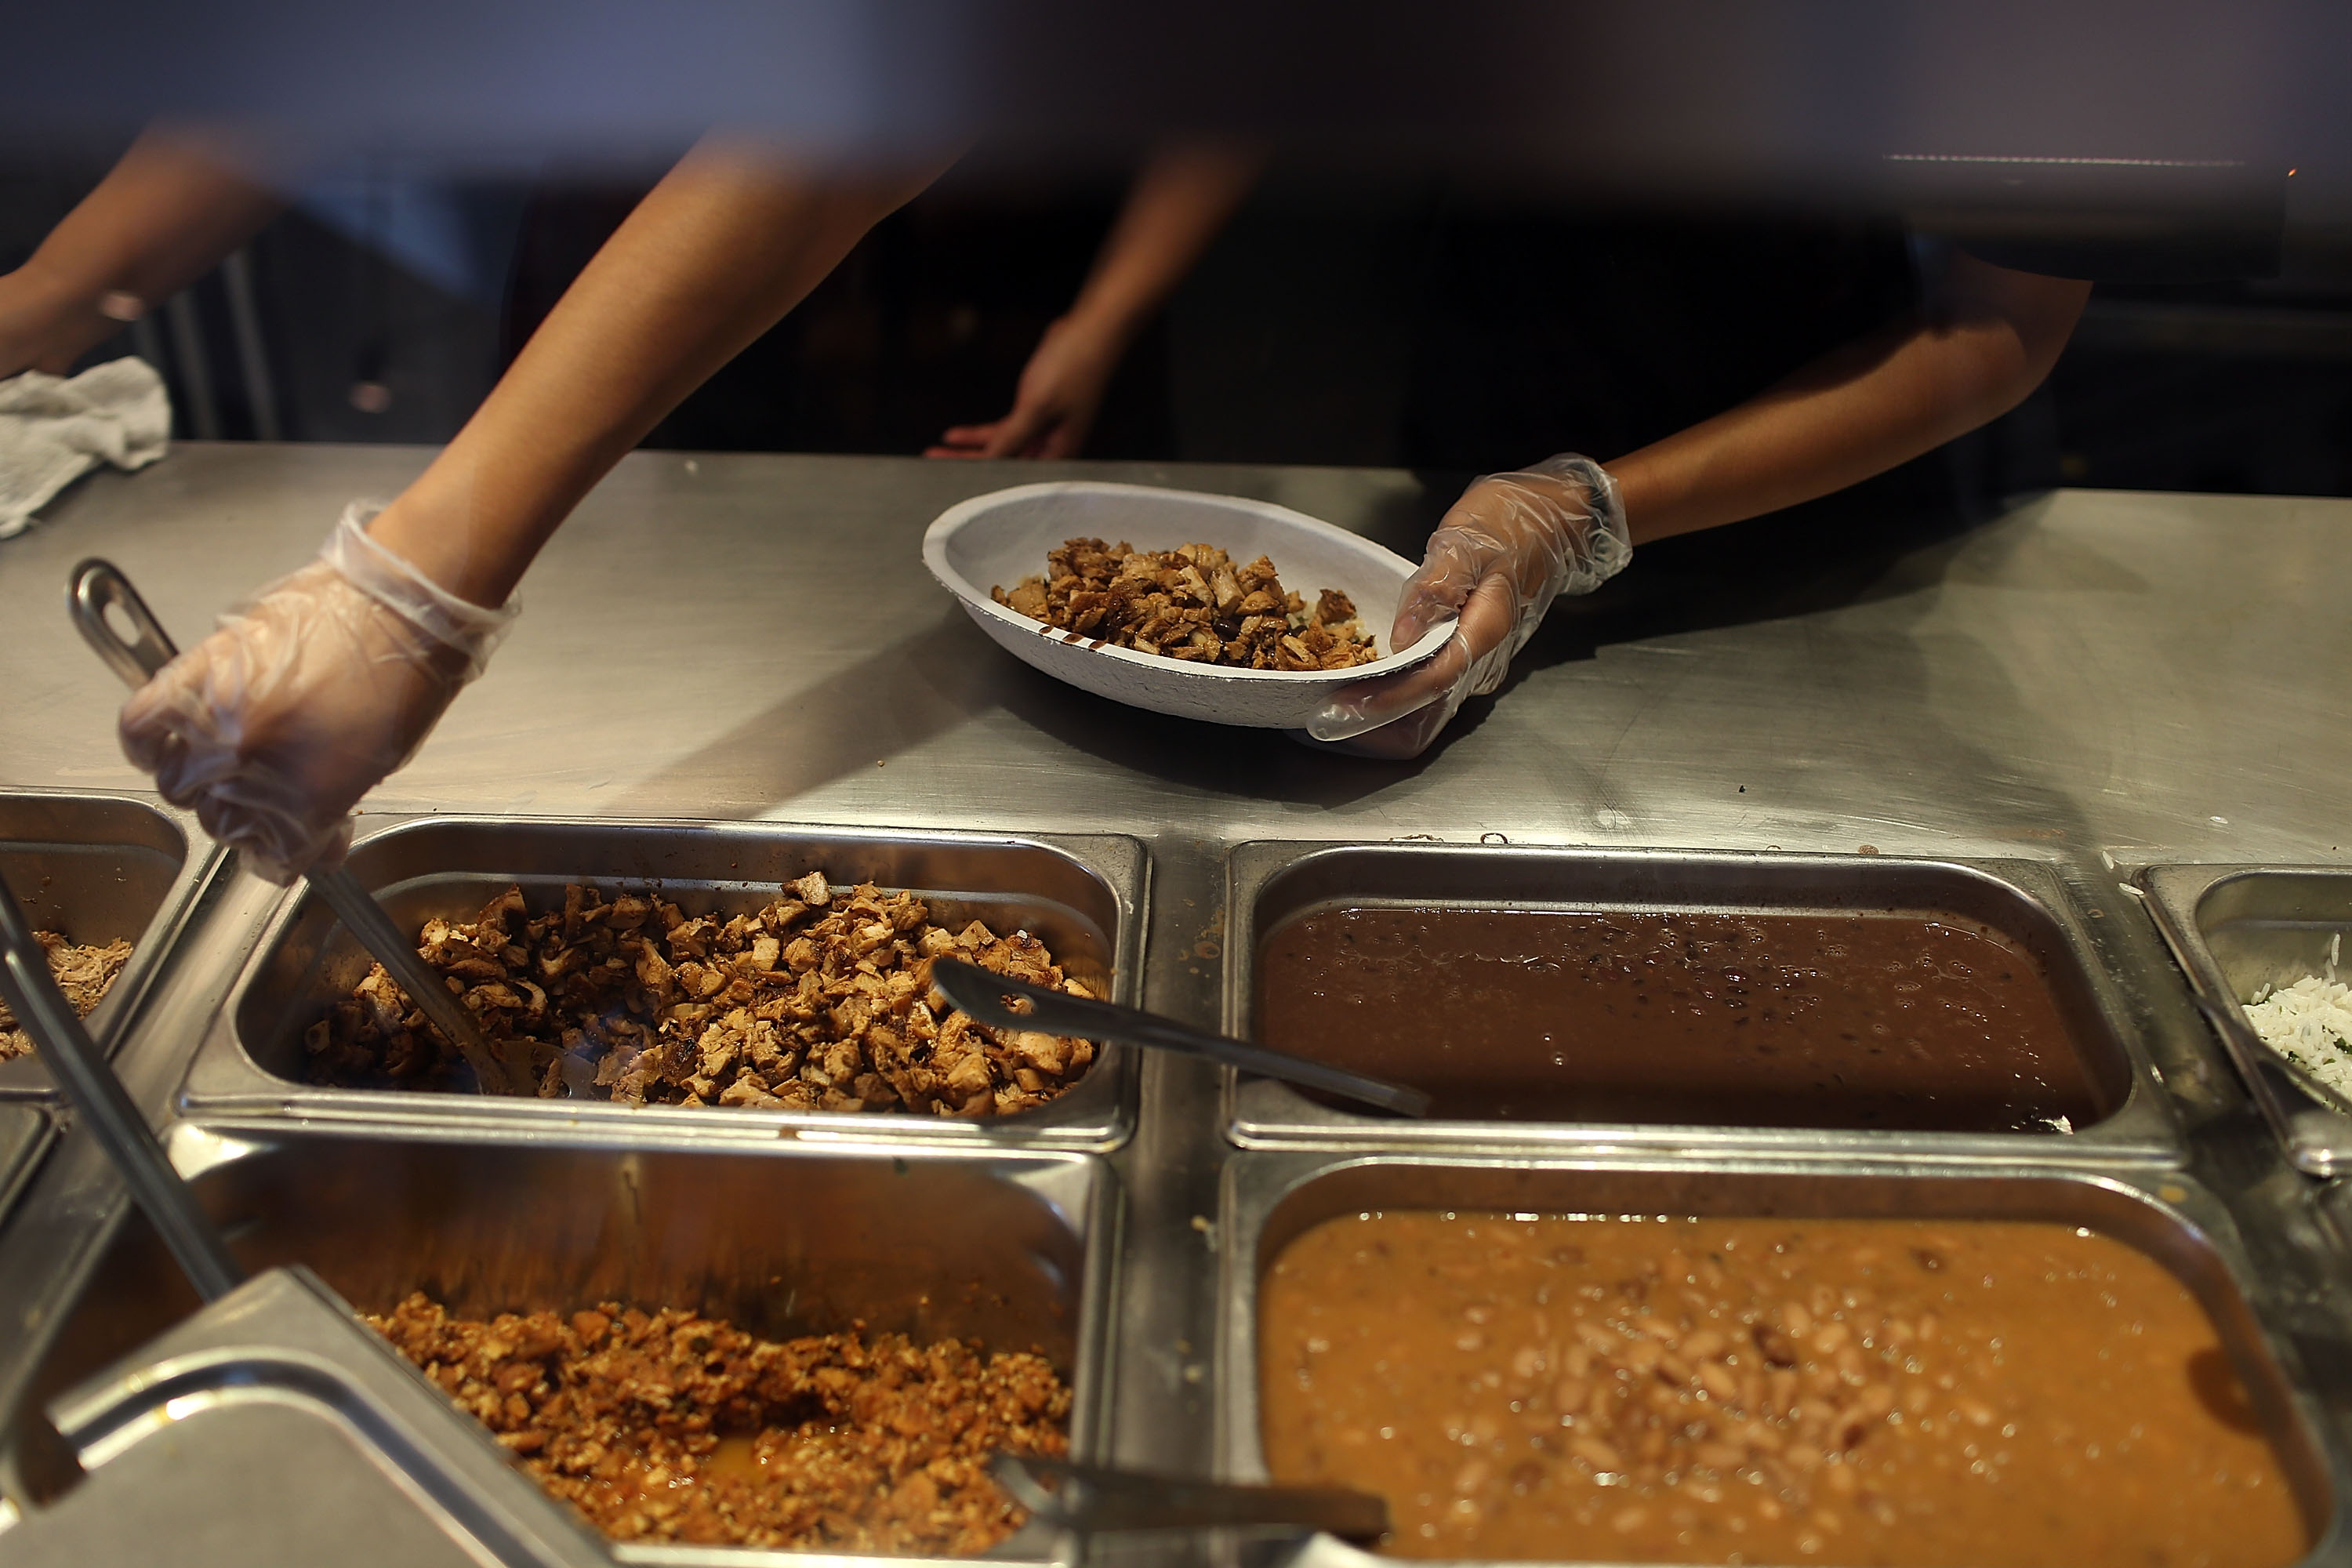 Chipotle restaurant workers fill orders for customers on the day that the company announced it will only use non-GMO ingredients in its food on April 27, 2015 in Miami, Florida.